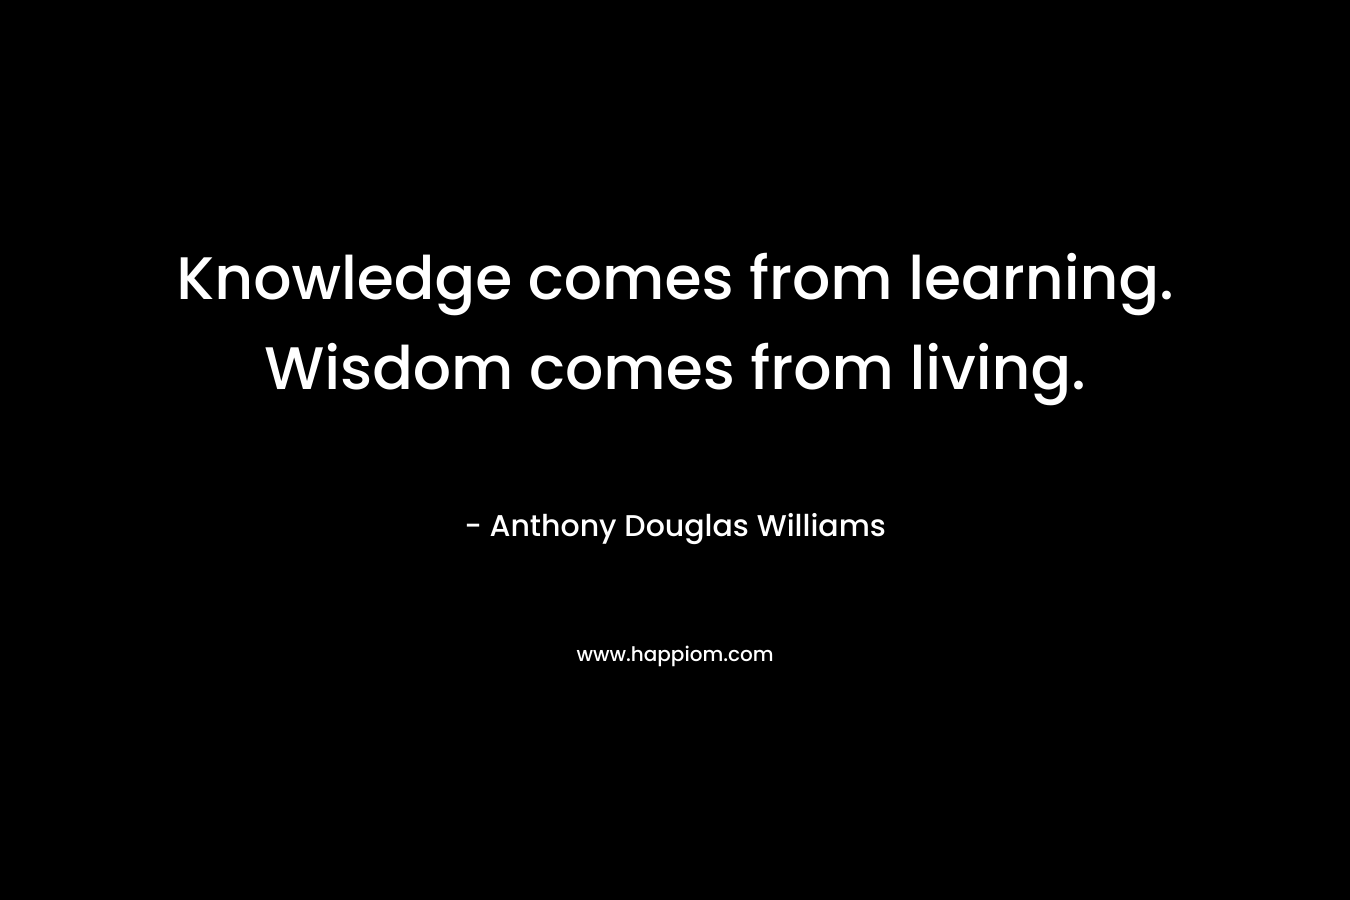 Knowledge comes from learning. Wisdom comes from living.